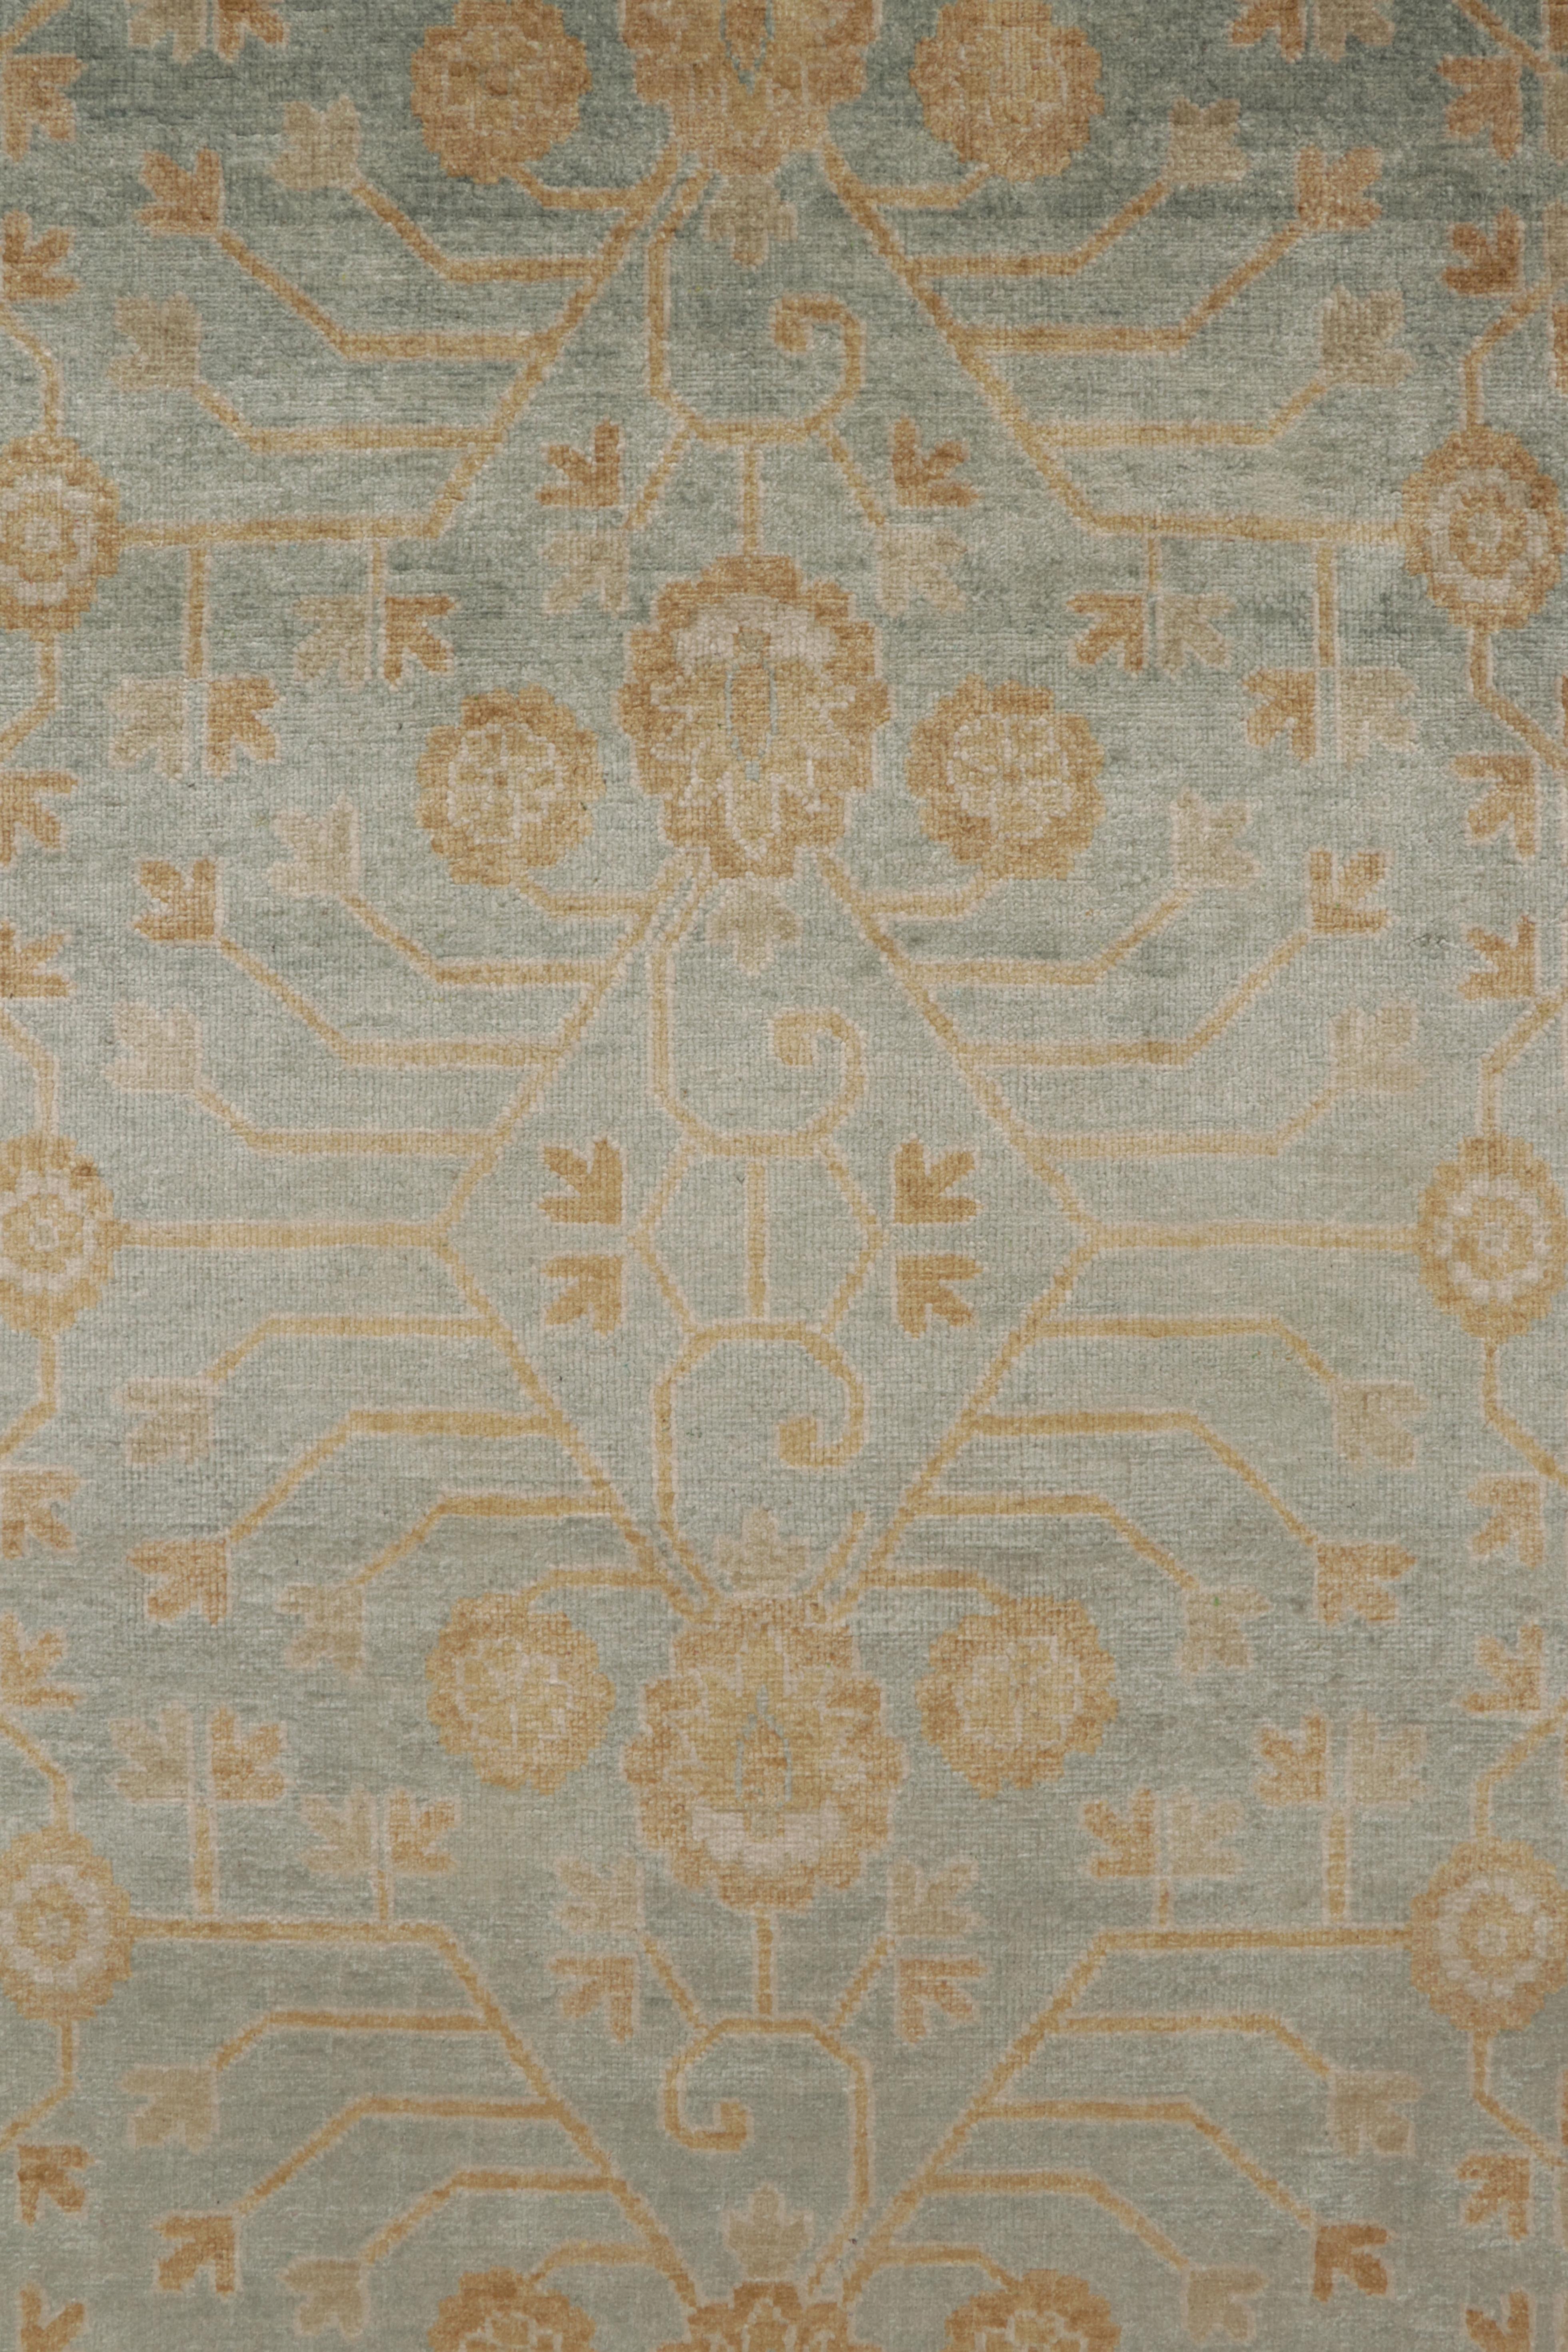 Contemporary Rug & Kilim’s Khotan style rug in Blue with Beige, Gold Pomegranate Patterns For Sale